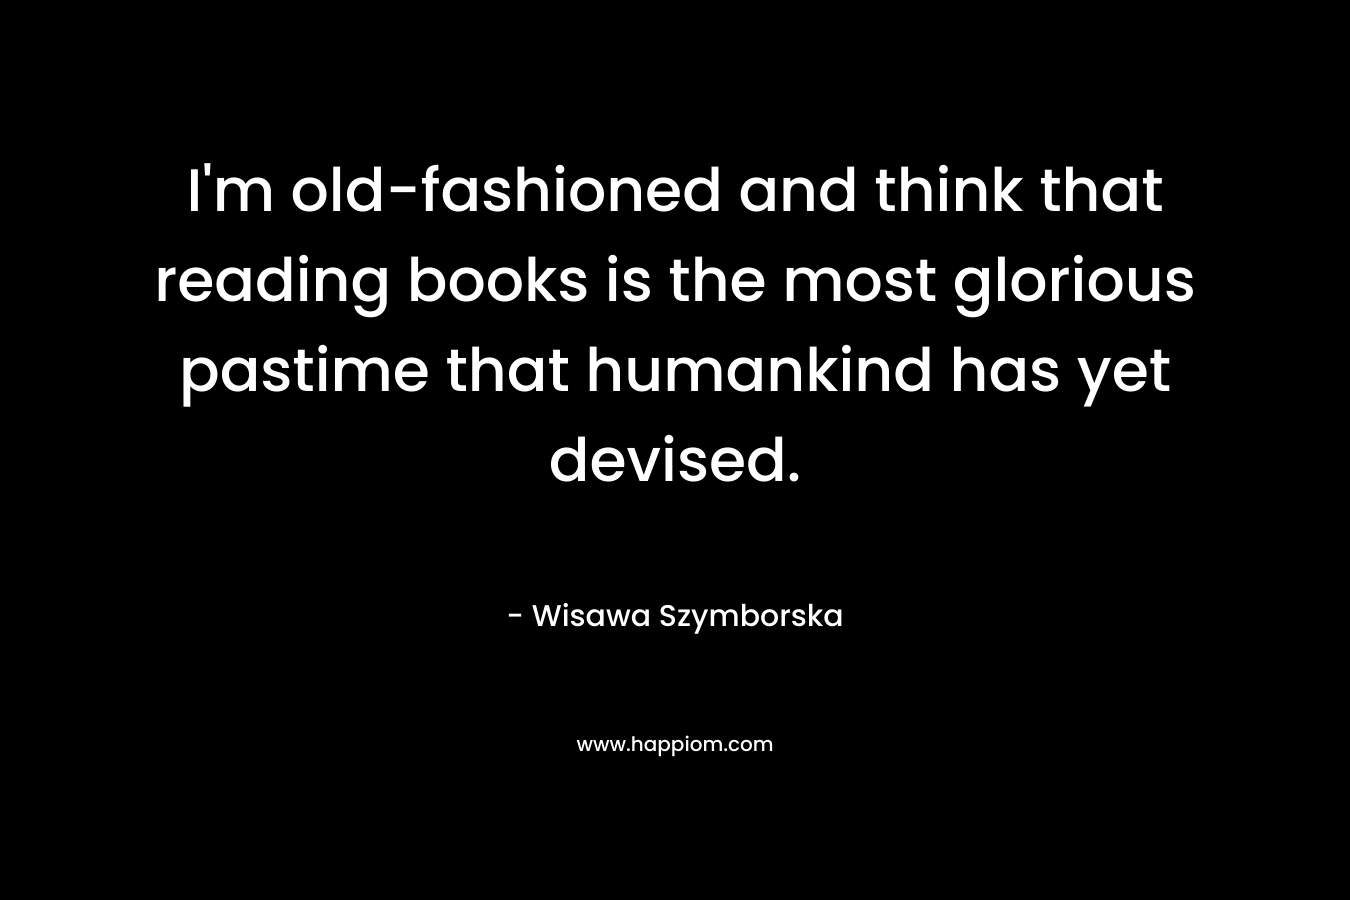 I’m old-fashioned and think that reading books is the most glorious pastime that humankind has yet devised. – Wisawa Szymborska